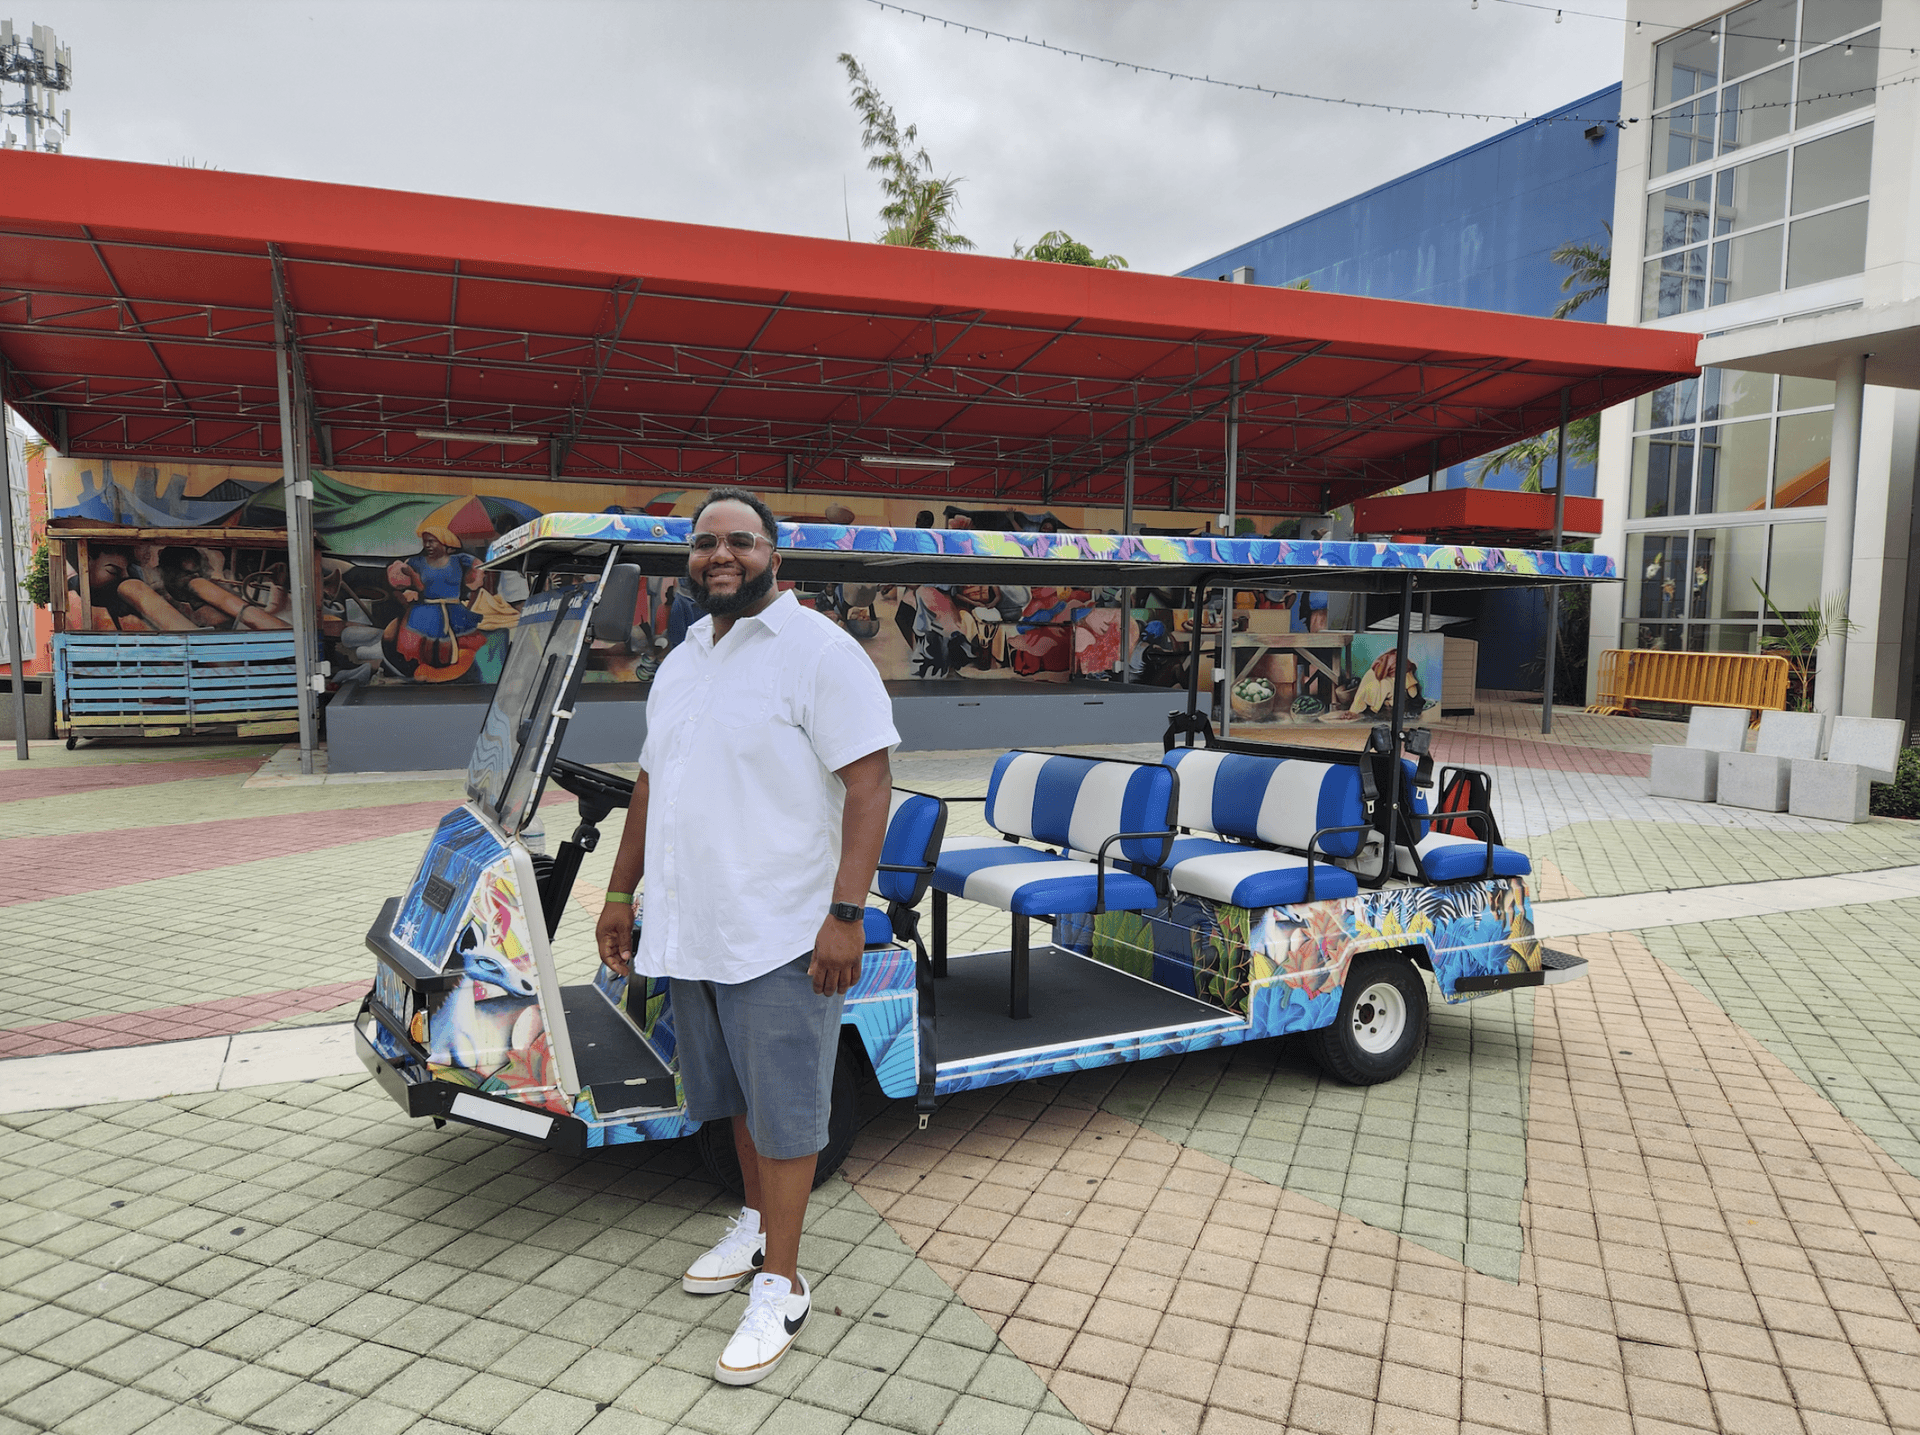 Abraham Metellus is one of the co-founders of Tap Tap Tours, the only tour company in Miami's Little Haiti.